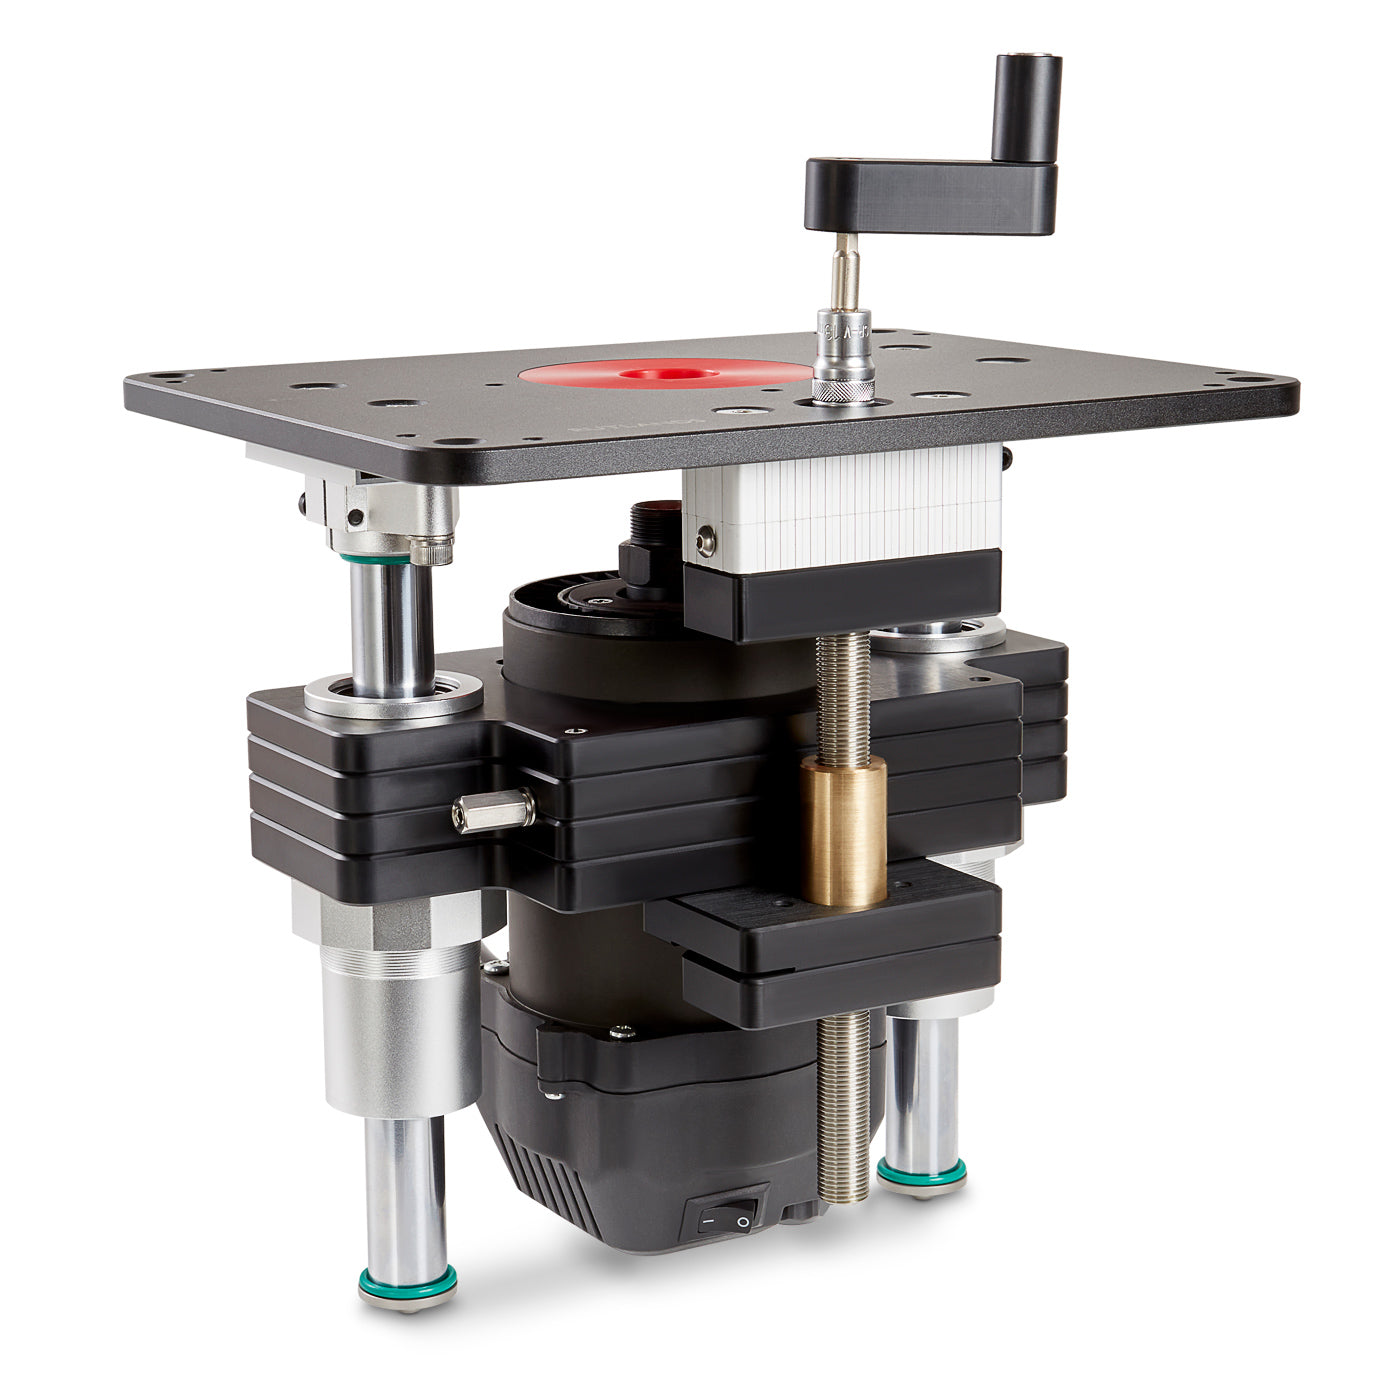 Cast Router Table GTS - R15 Lift and Motor